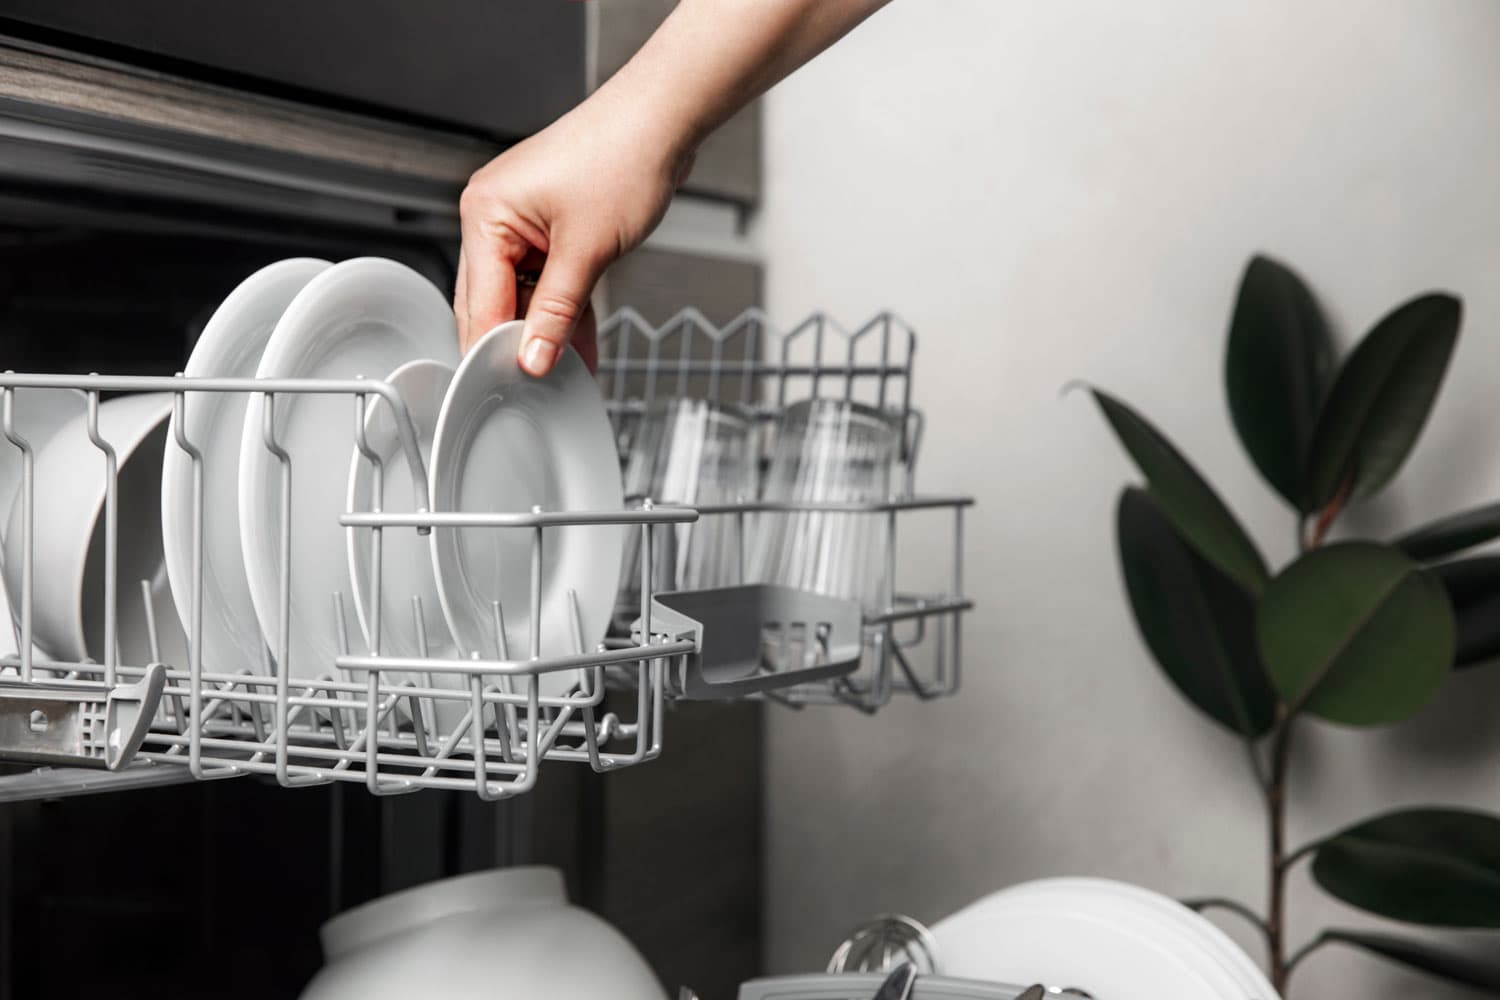 Placing dishwashers in the kitchen